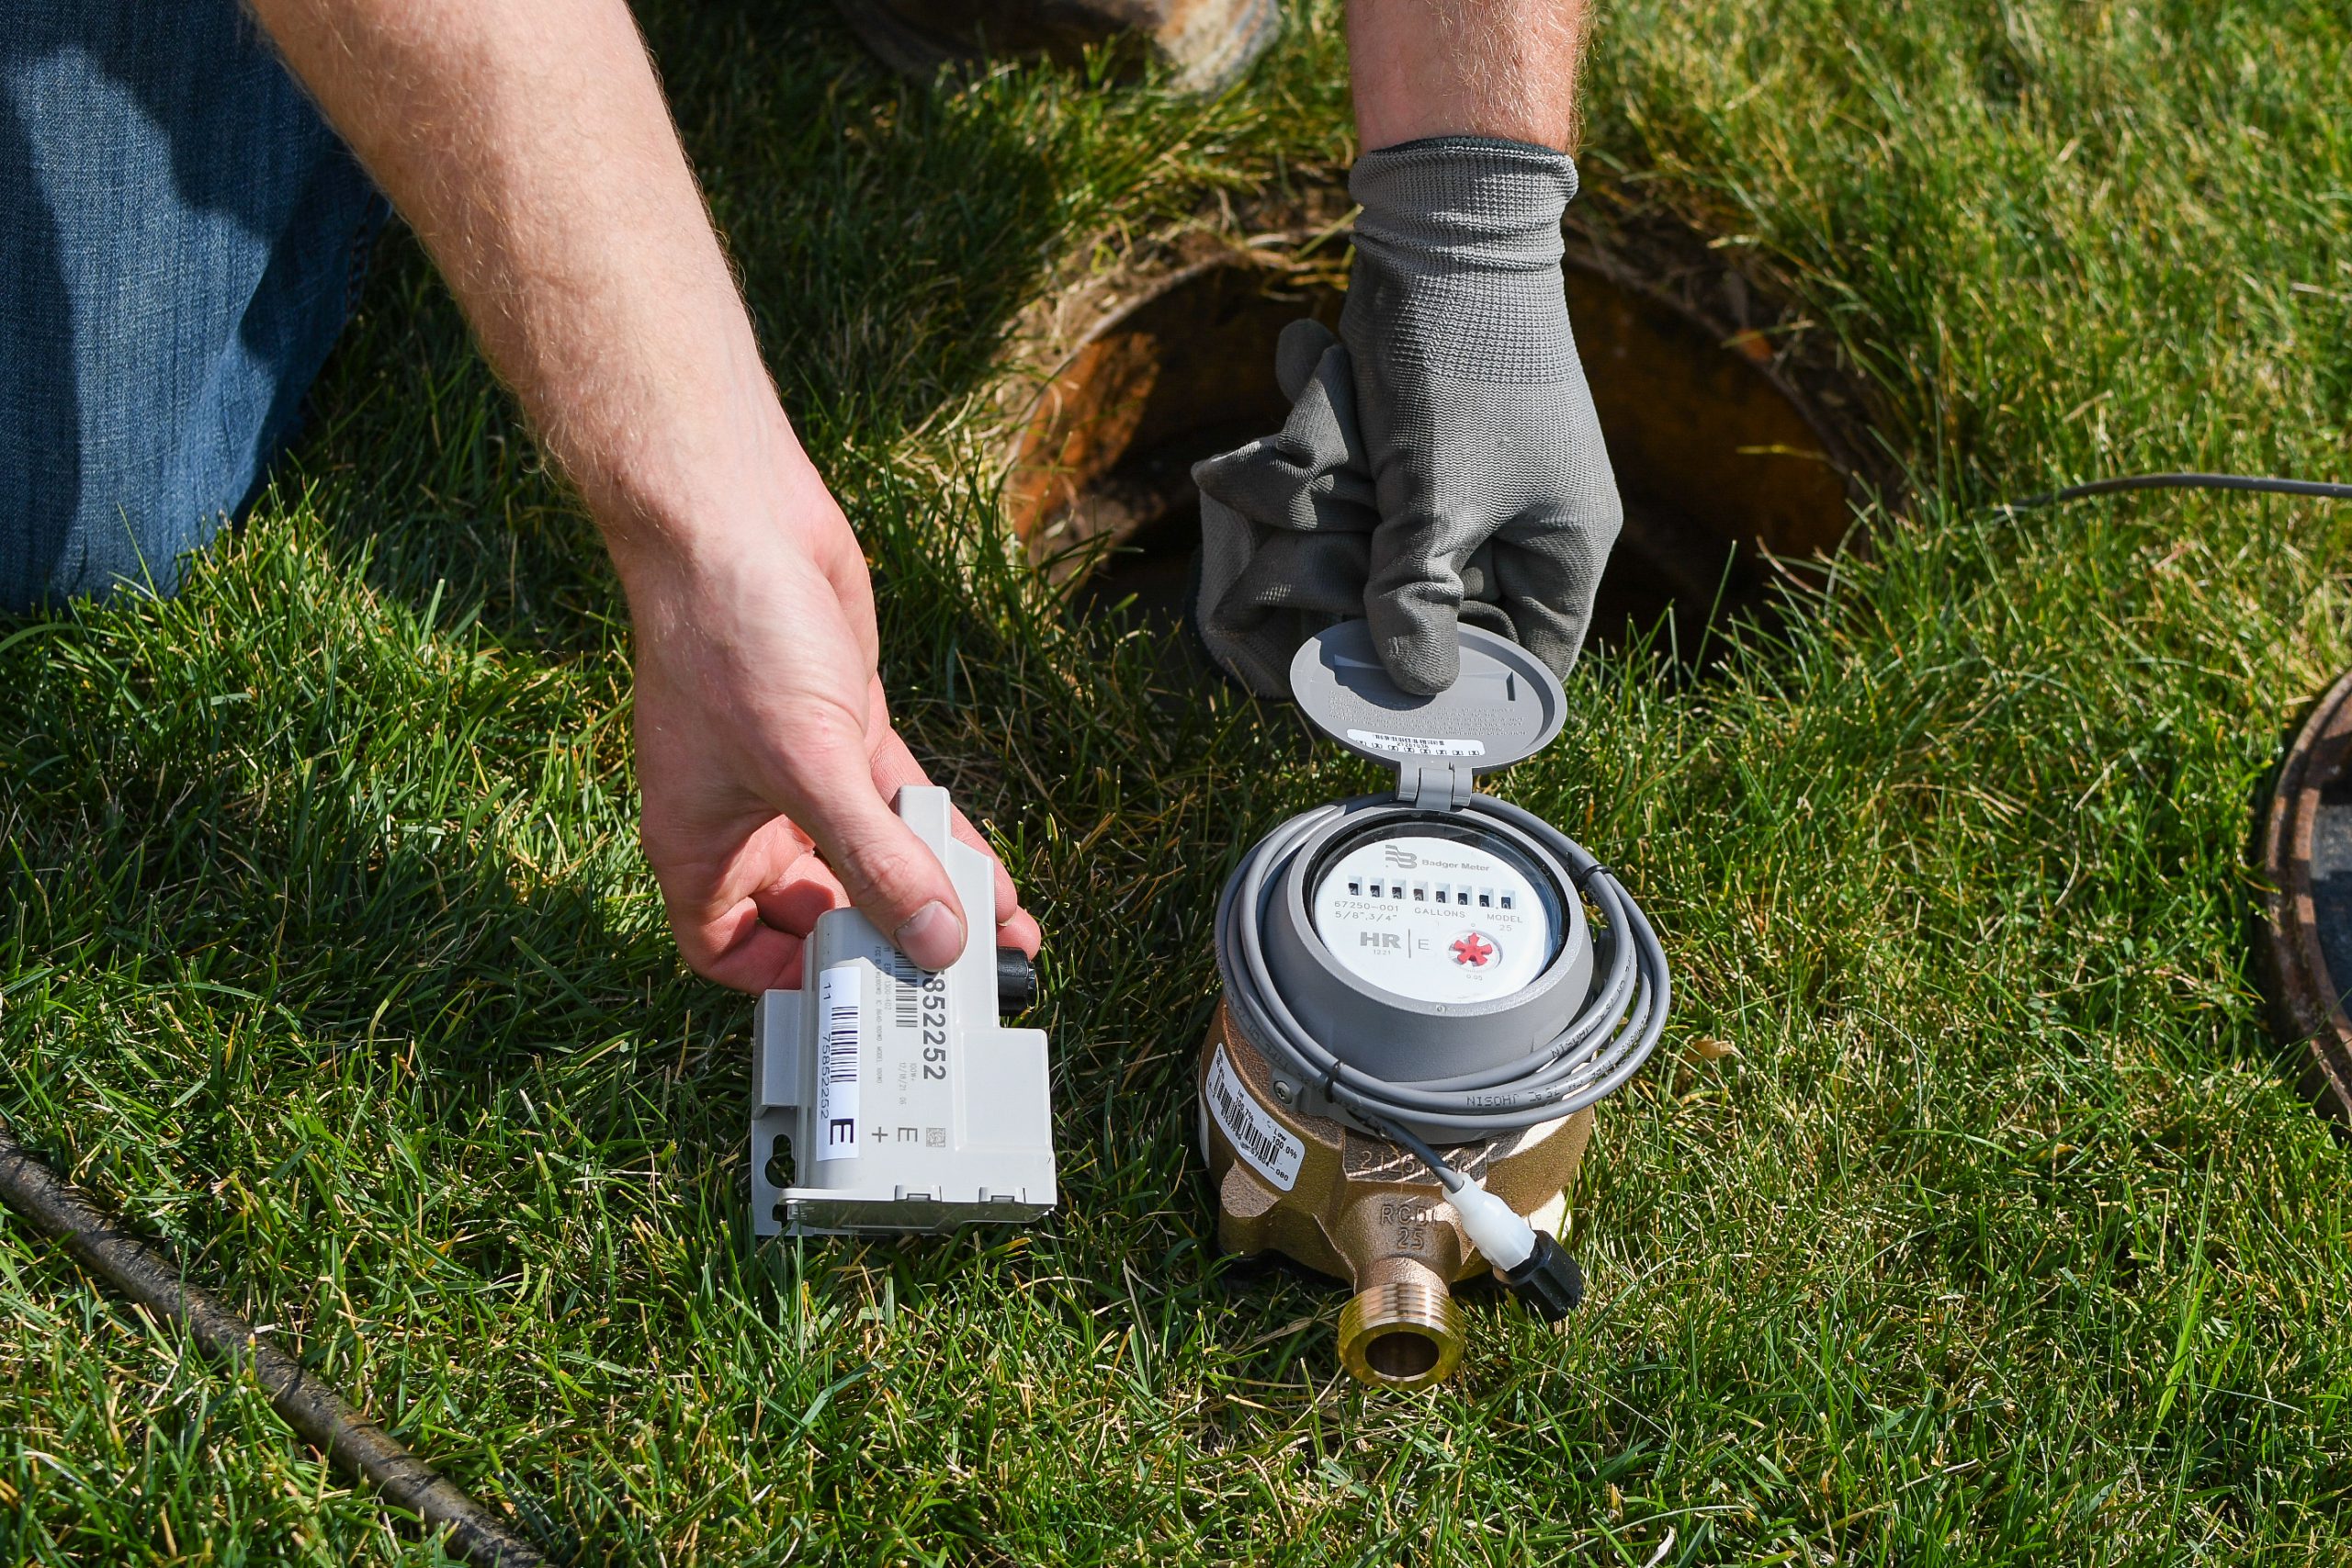 A person knealing on green grass shows updated meter equipment next to an irrigation hole.